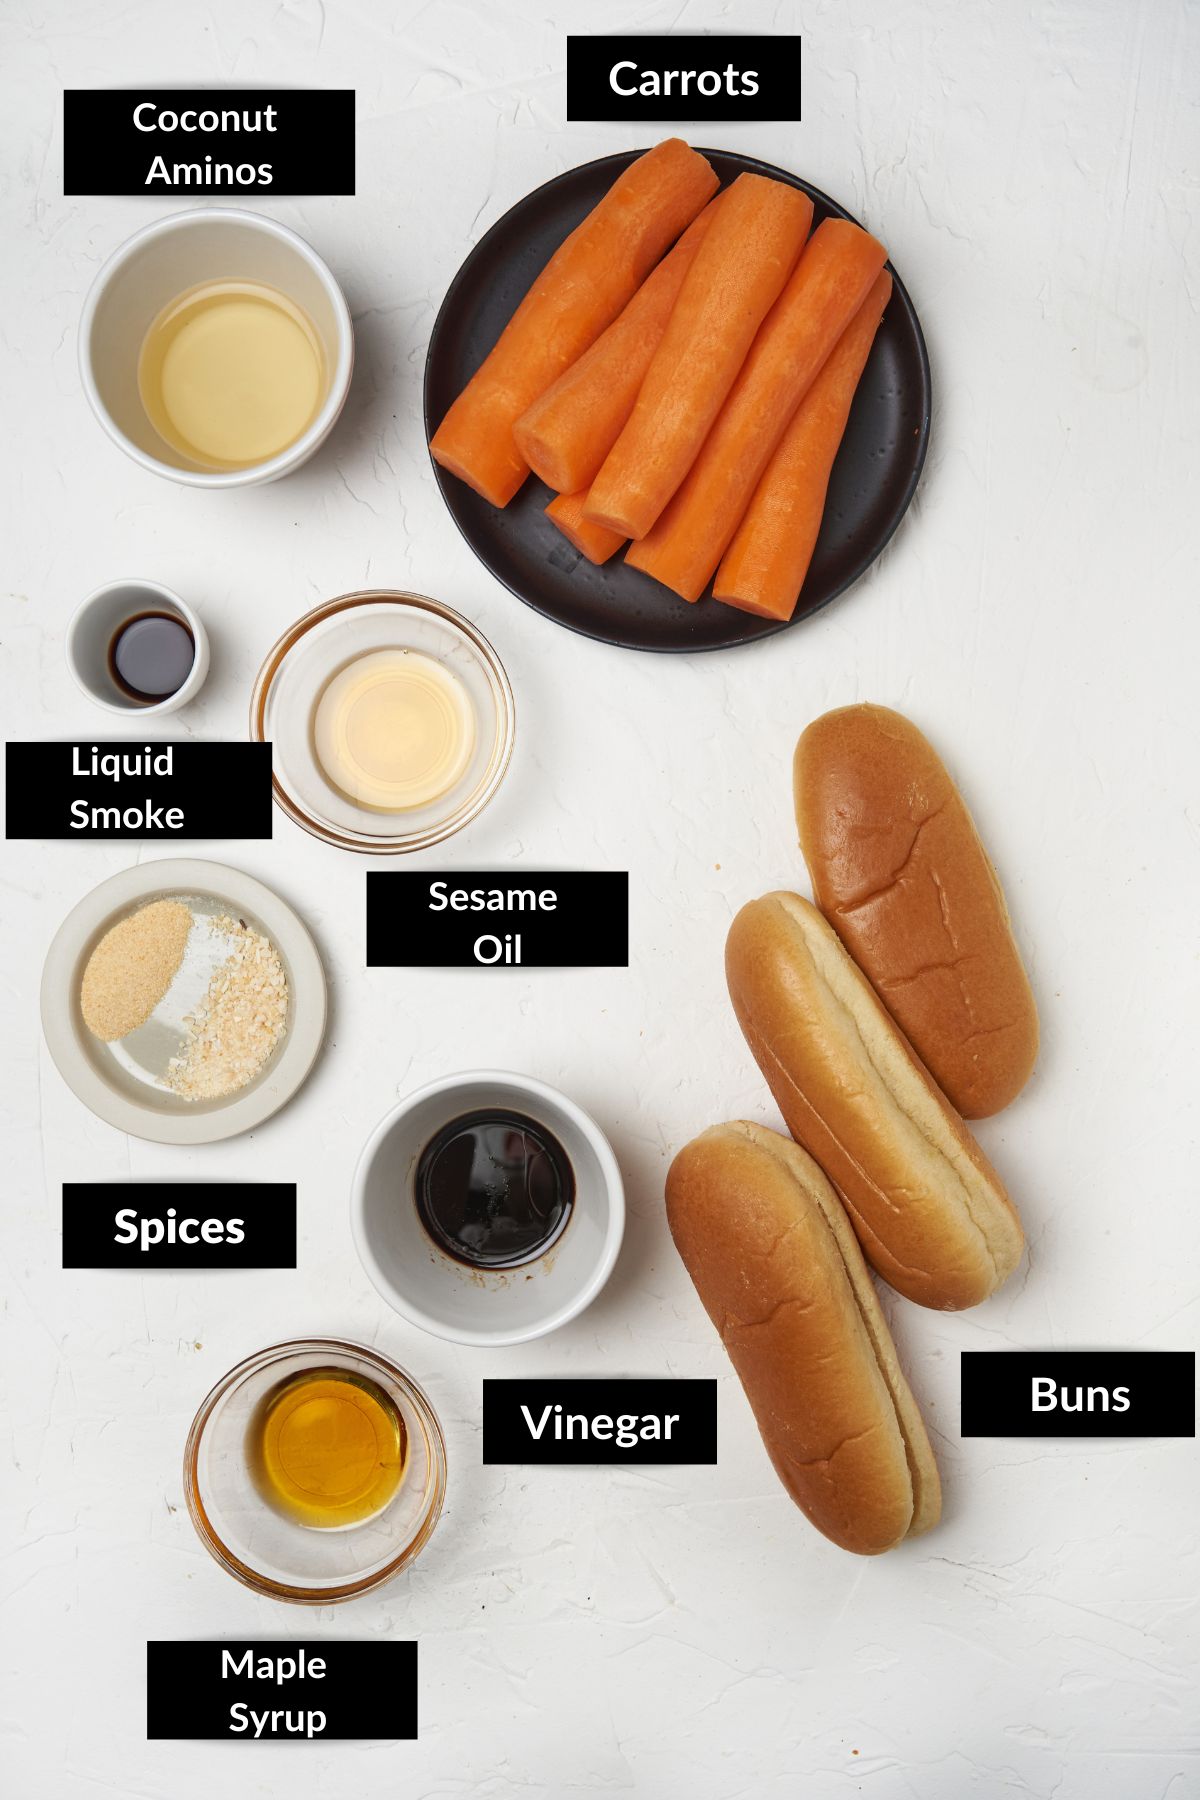 image of labeled ingredients for carrot dogs recipe